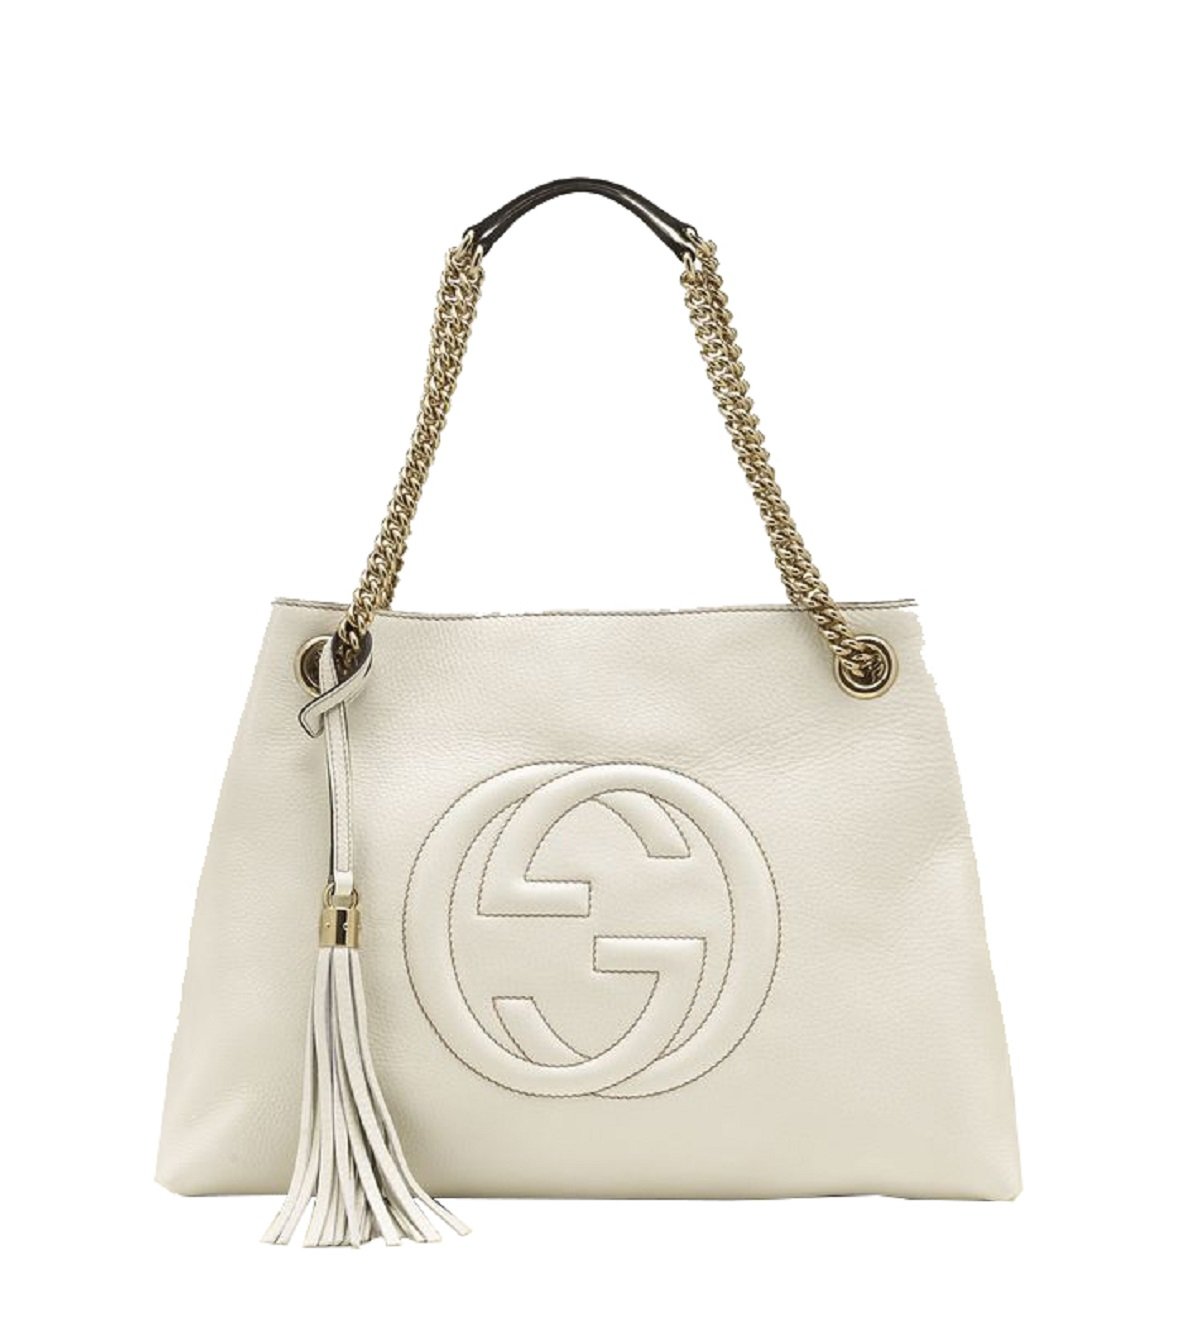 Gucci Soho GG Ivory Leather Chain Shoulder Tote Bag